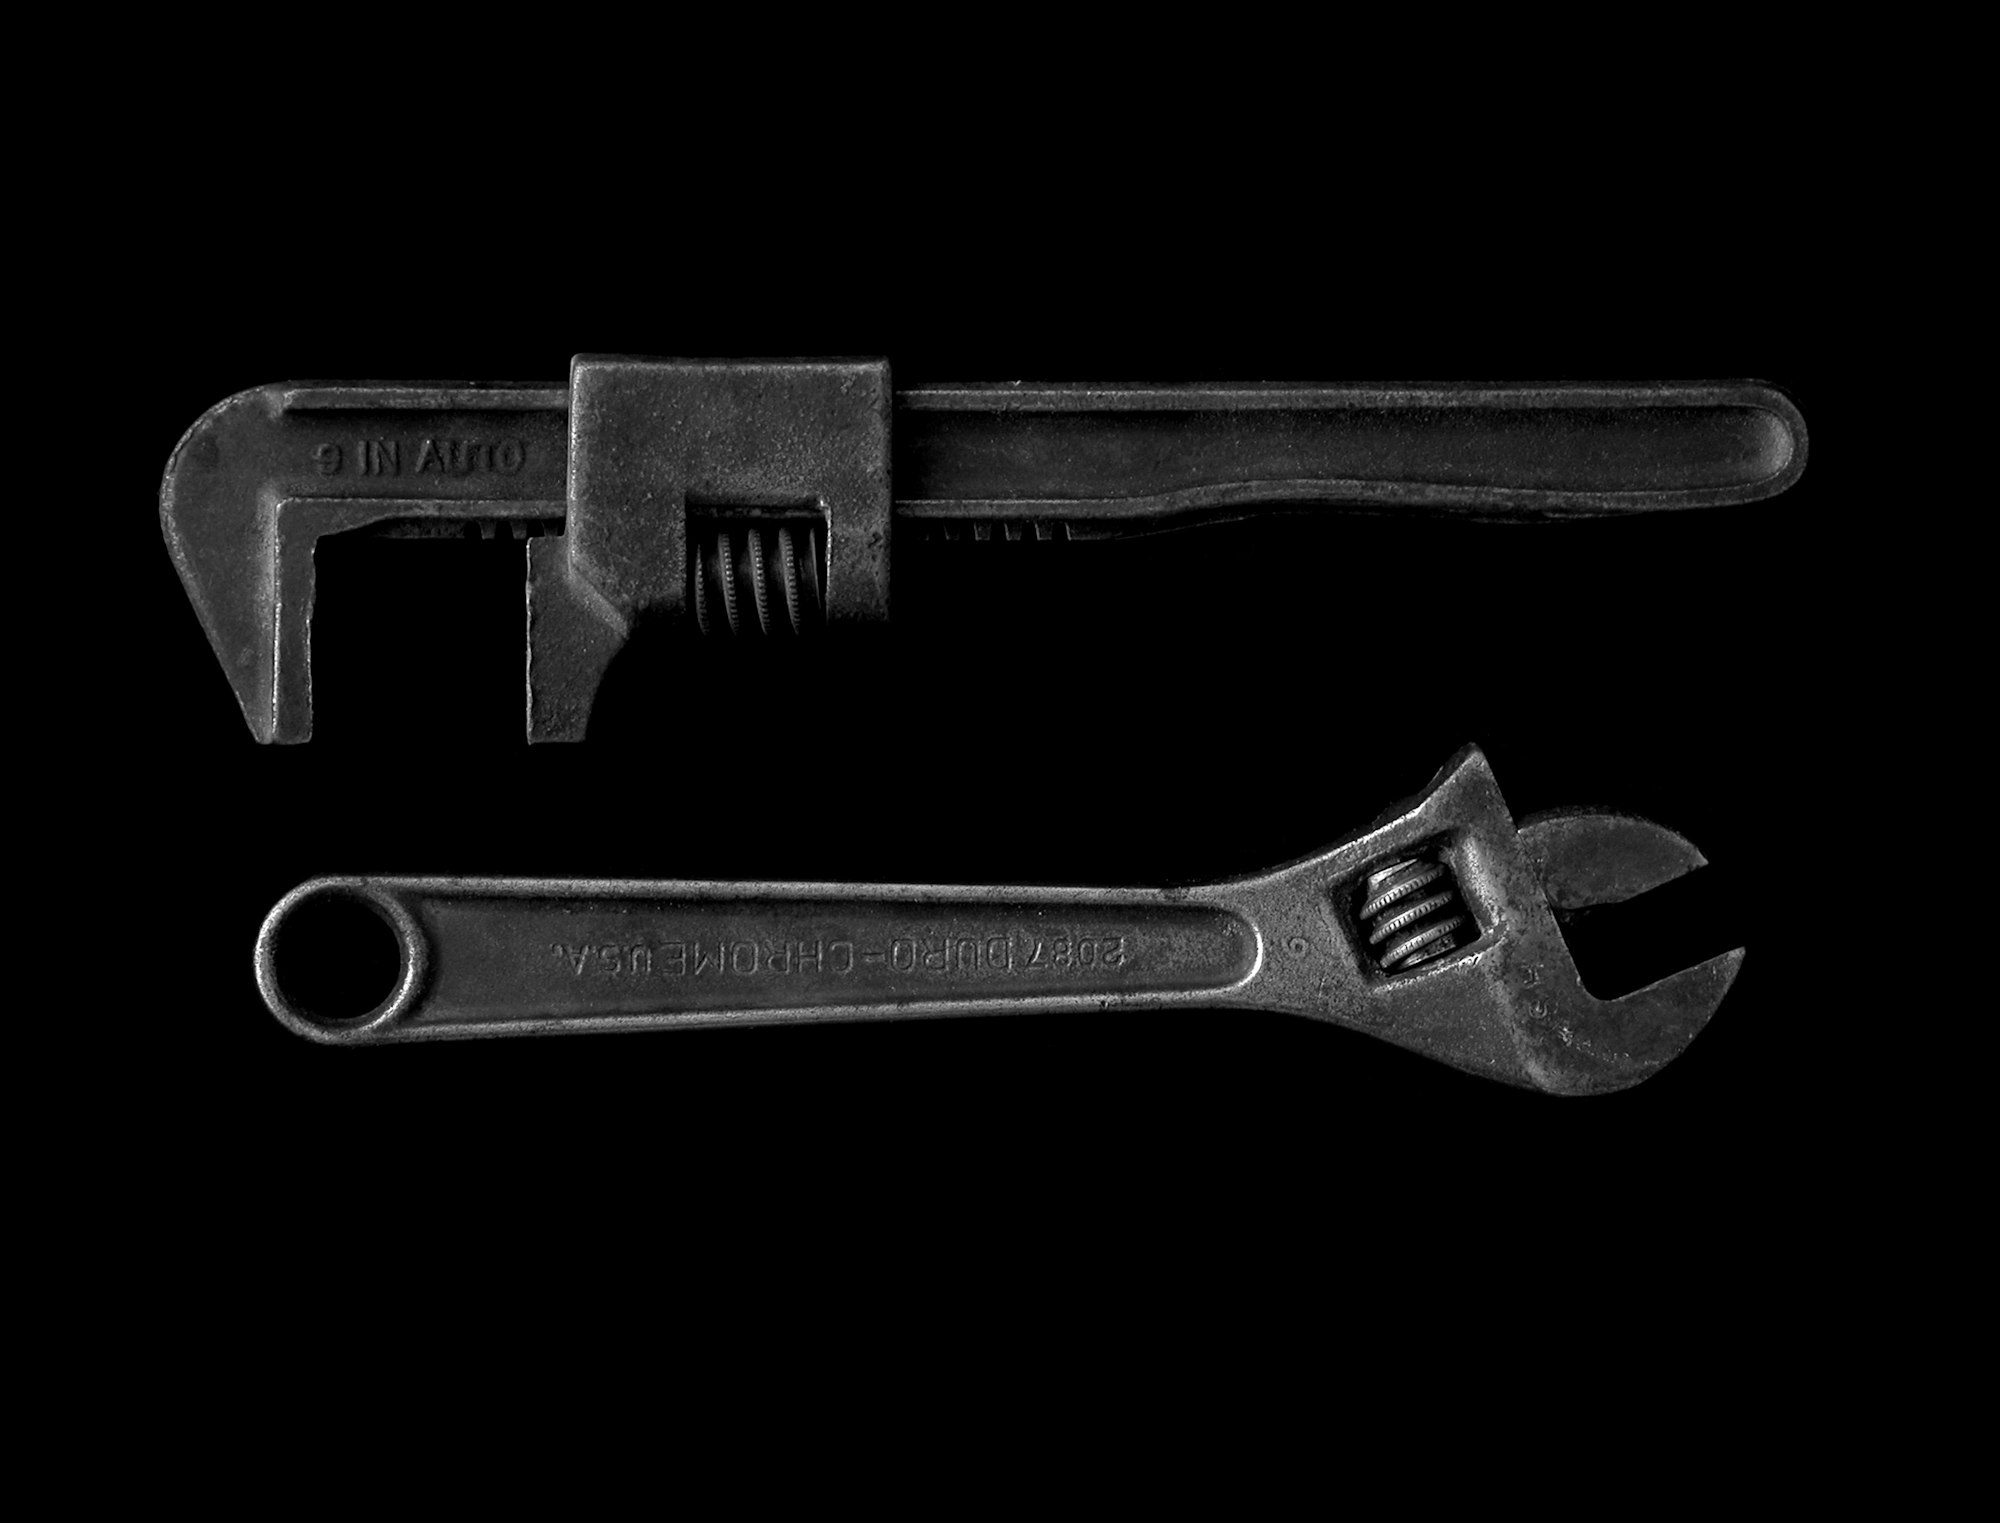 Wrenches on a black background